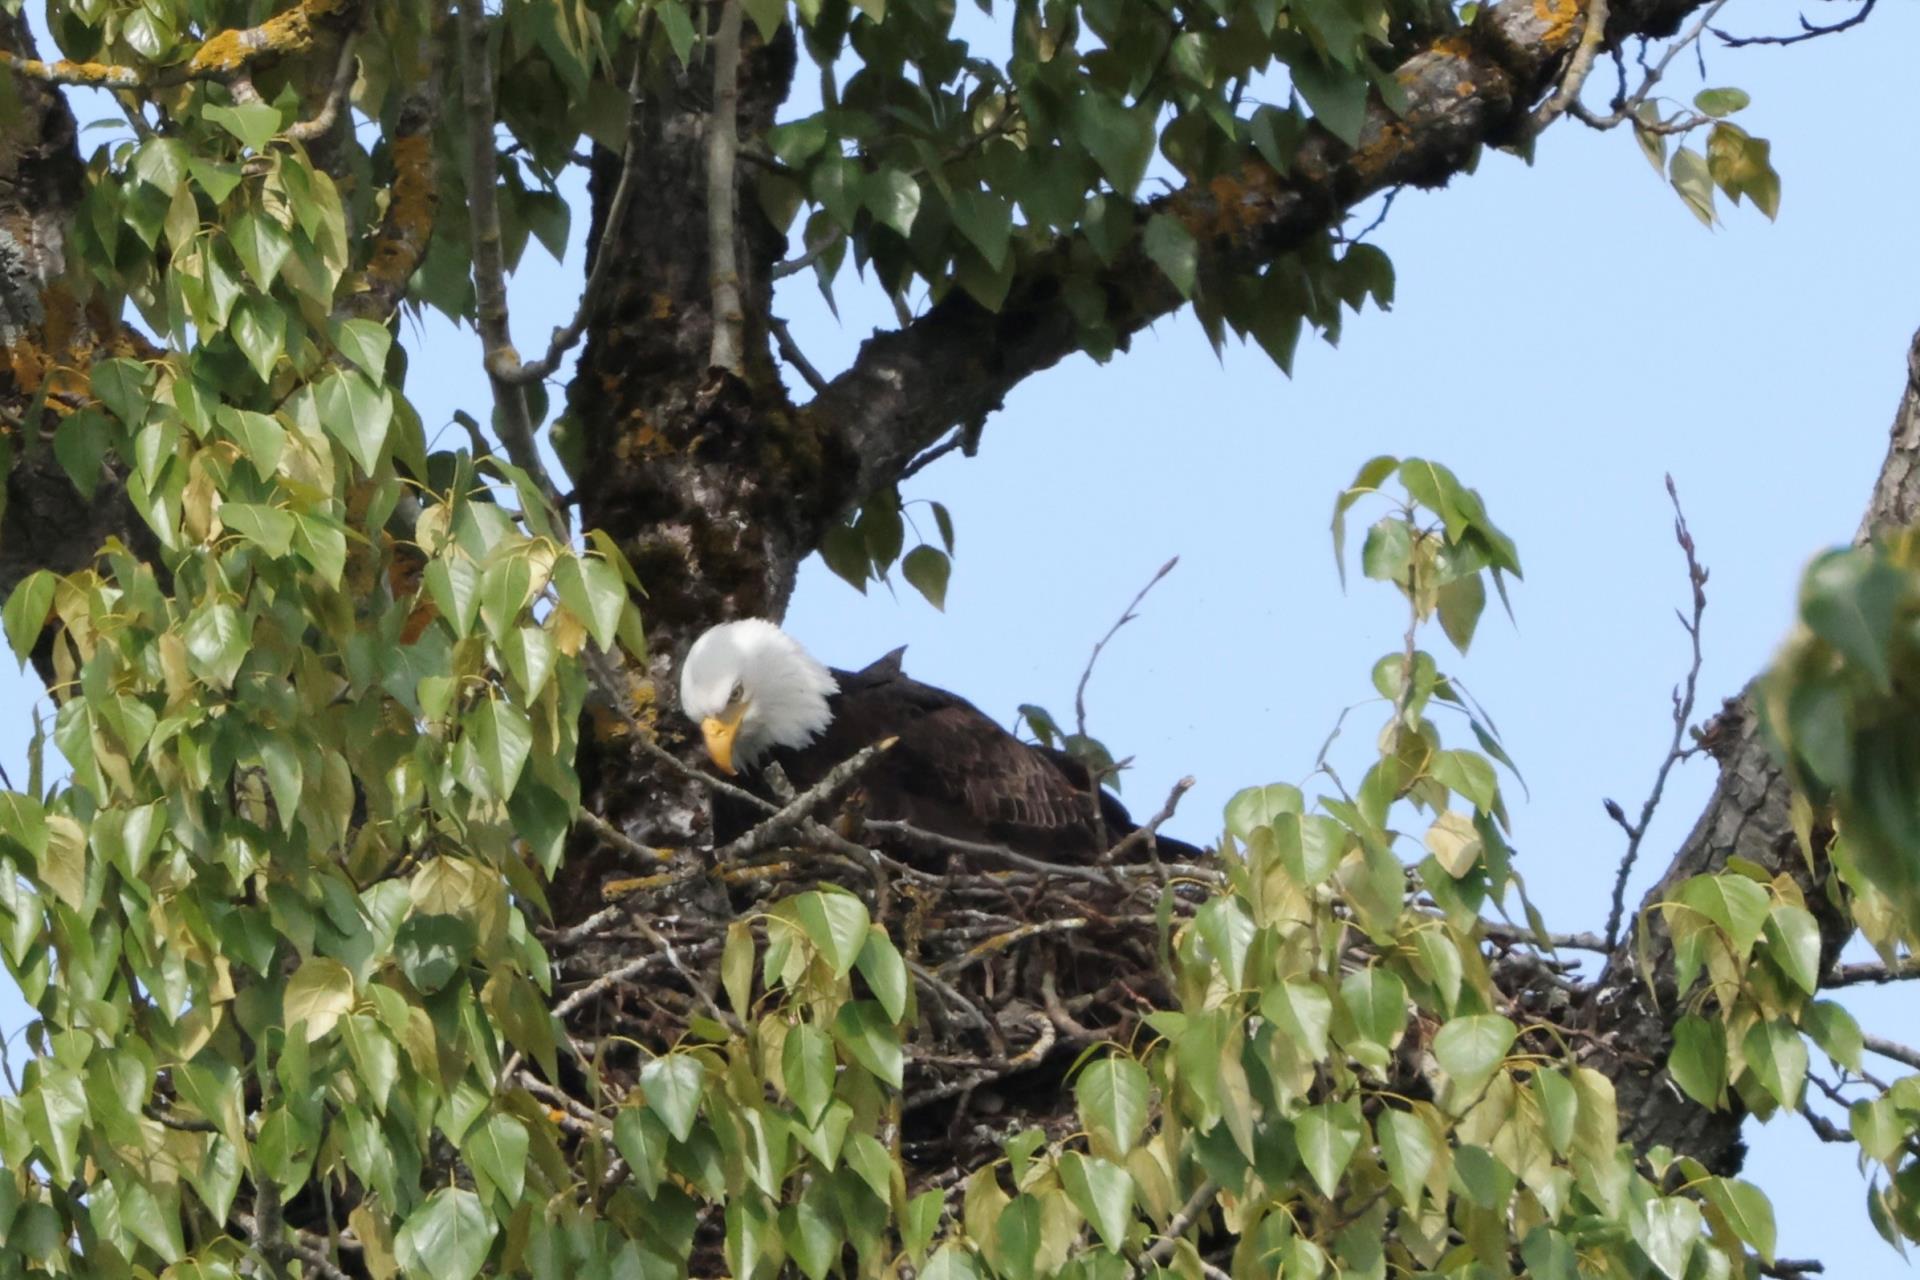 Eagle perched on nest